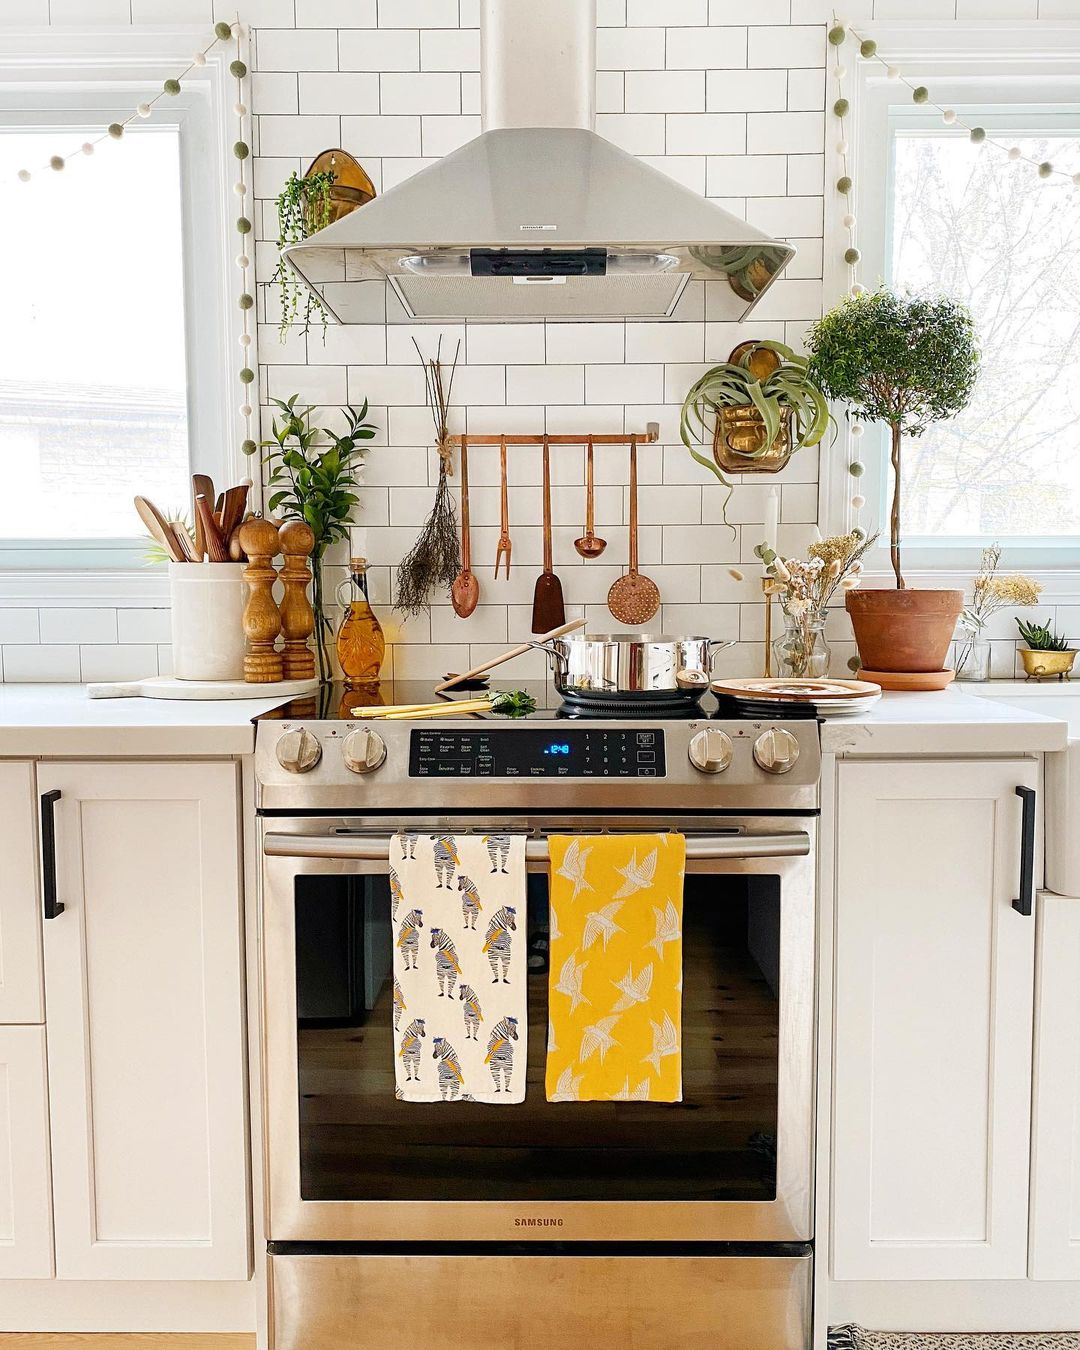 Kitchen Stovetop with a Convection Oven. Photo by Instagram user @thekwendyhome